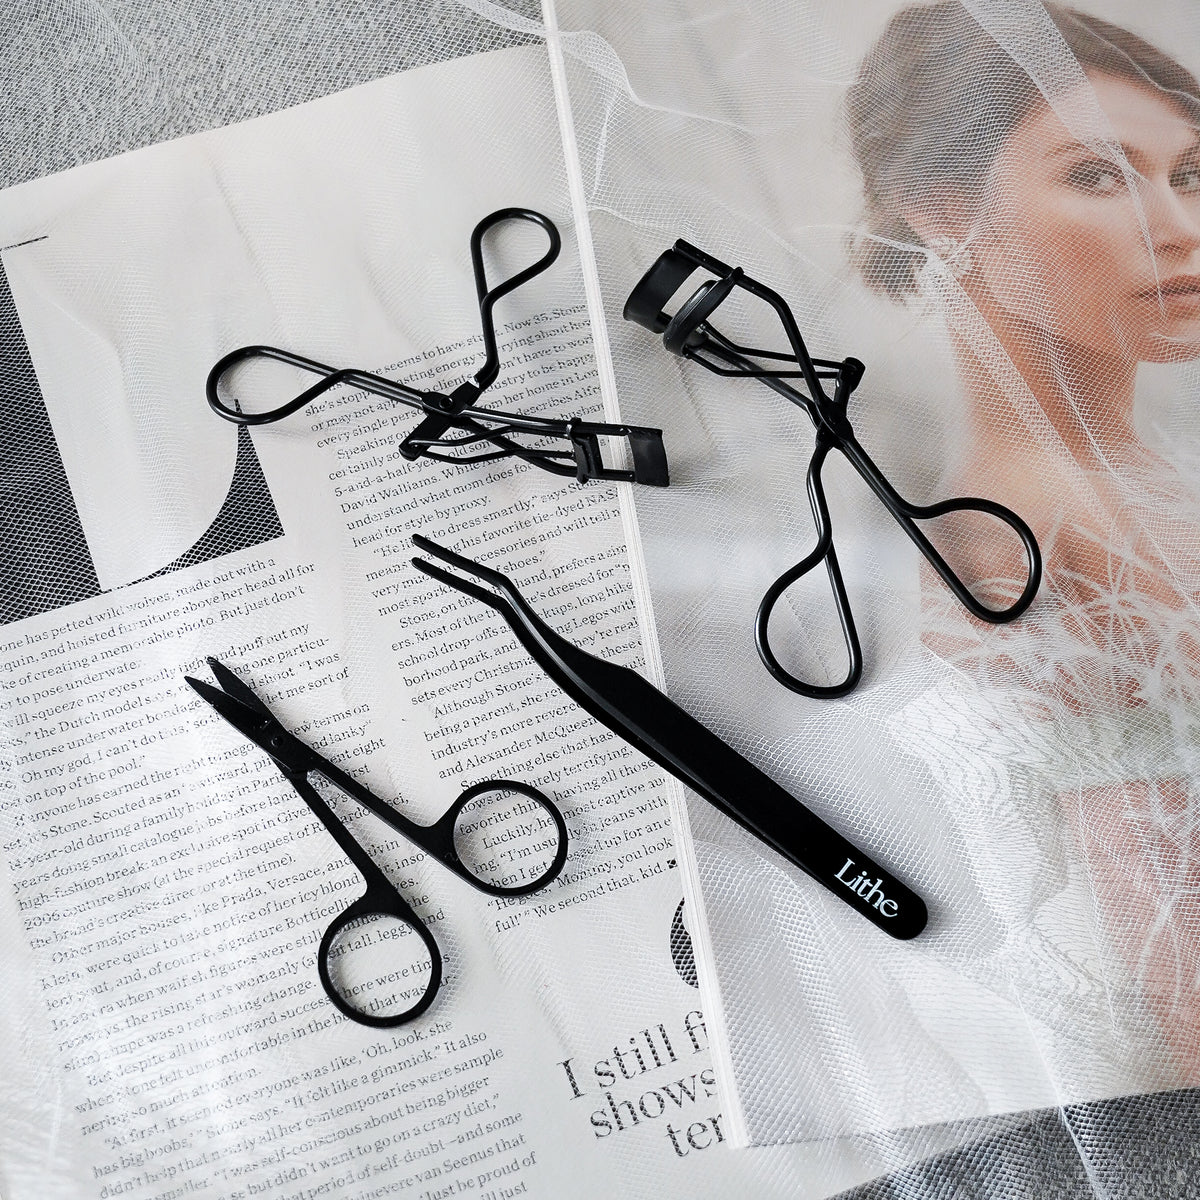 Lithe Lashes false lashes accessories, Lash Applicator. A matte black and ergonomic applicator tool to help in the false lashes application process. The image features the Lithe Lash Applicator, the Lithe Scissors, the Lash Curler, the Mini Lash Curler all spread on top of a black and white magazine.